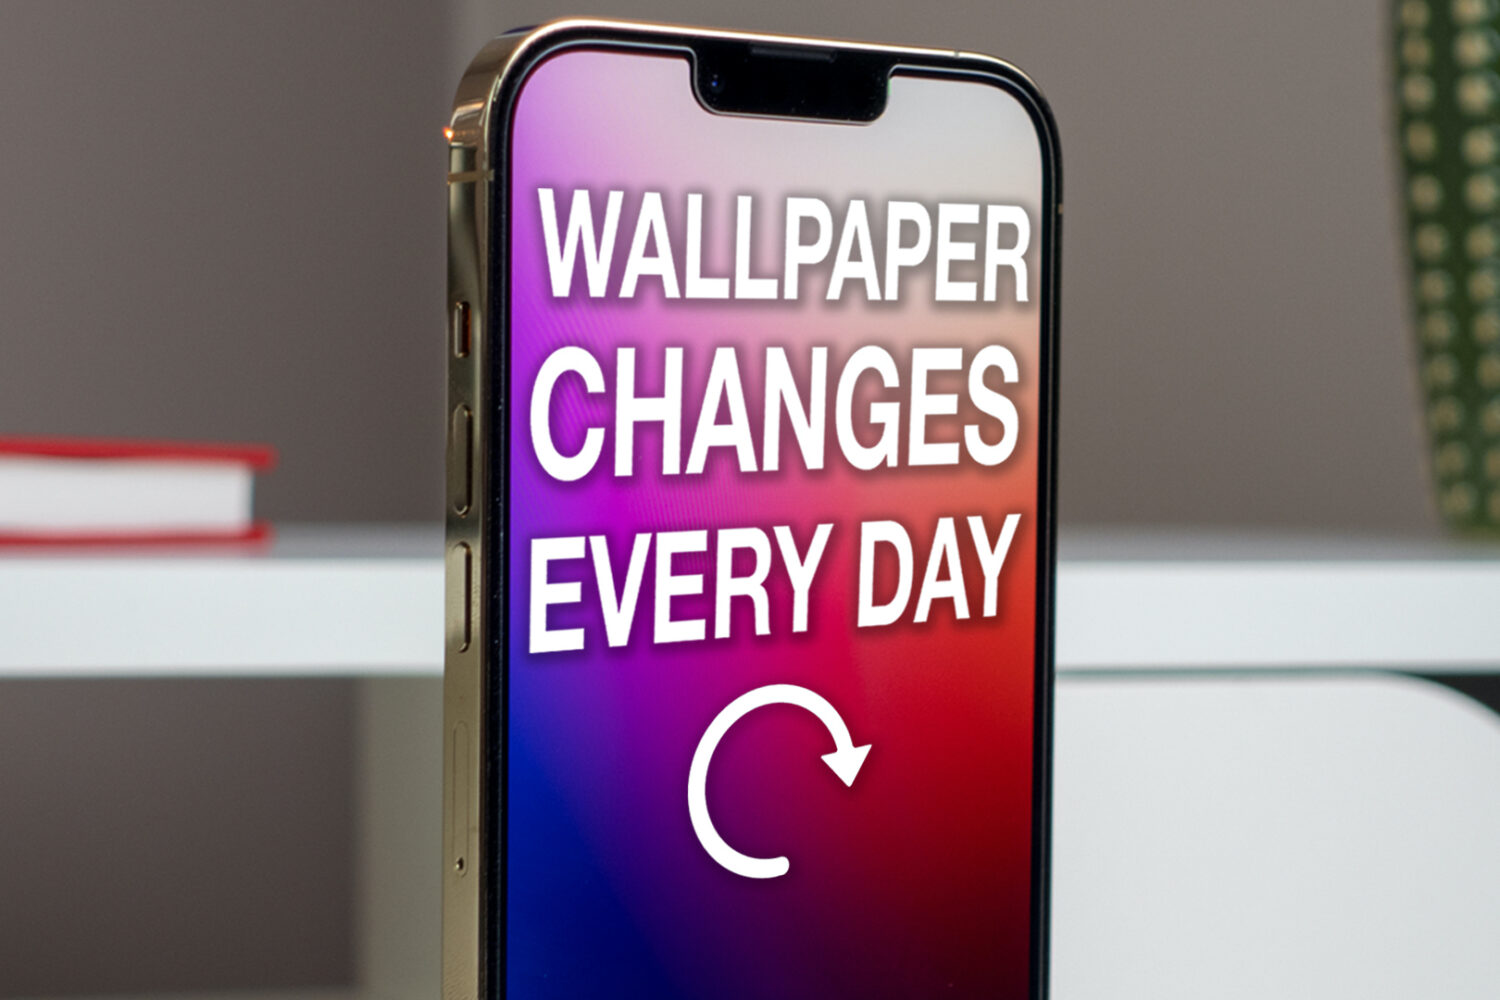 wallpaper changes every day